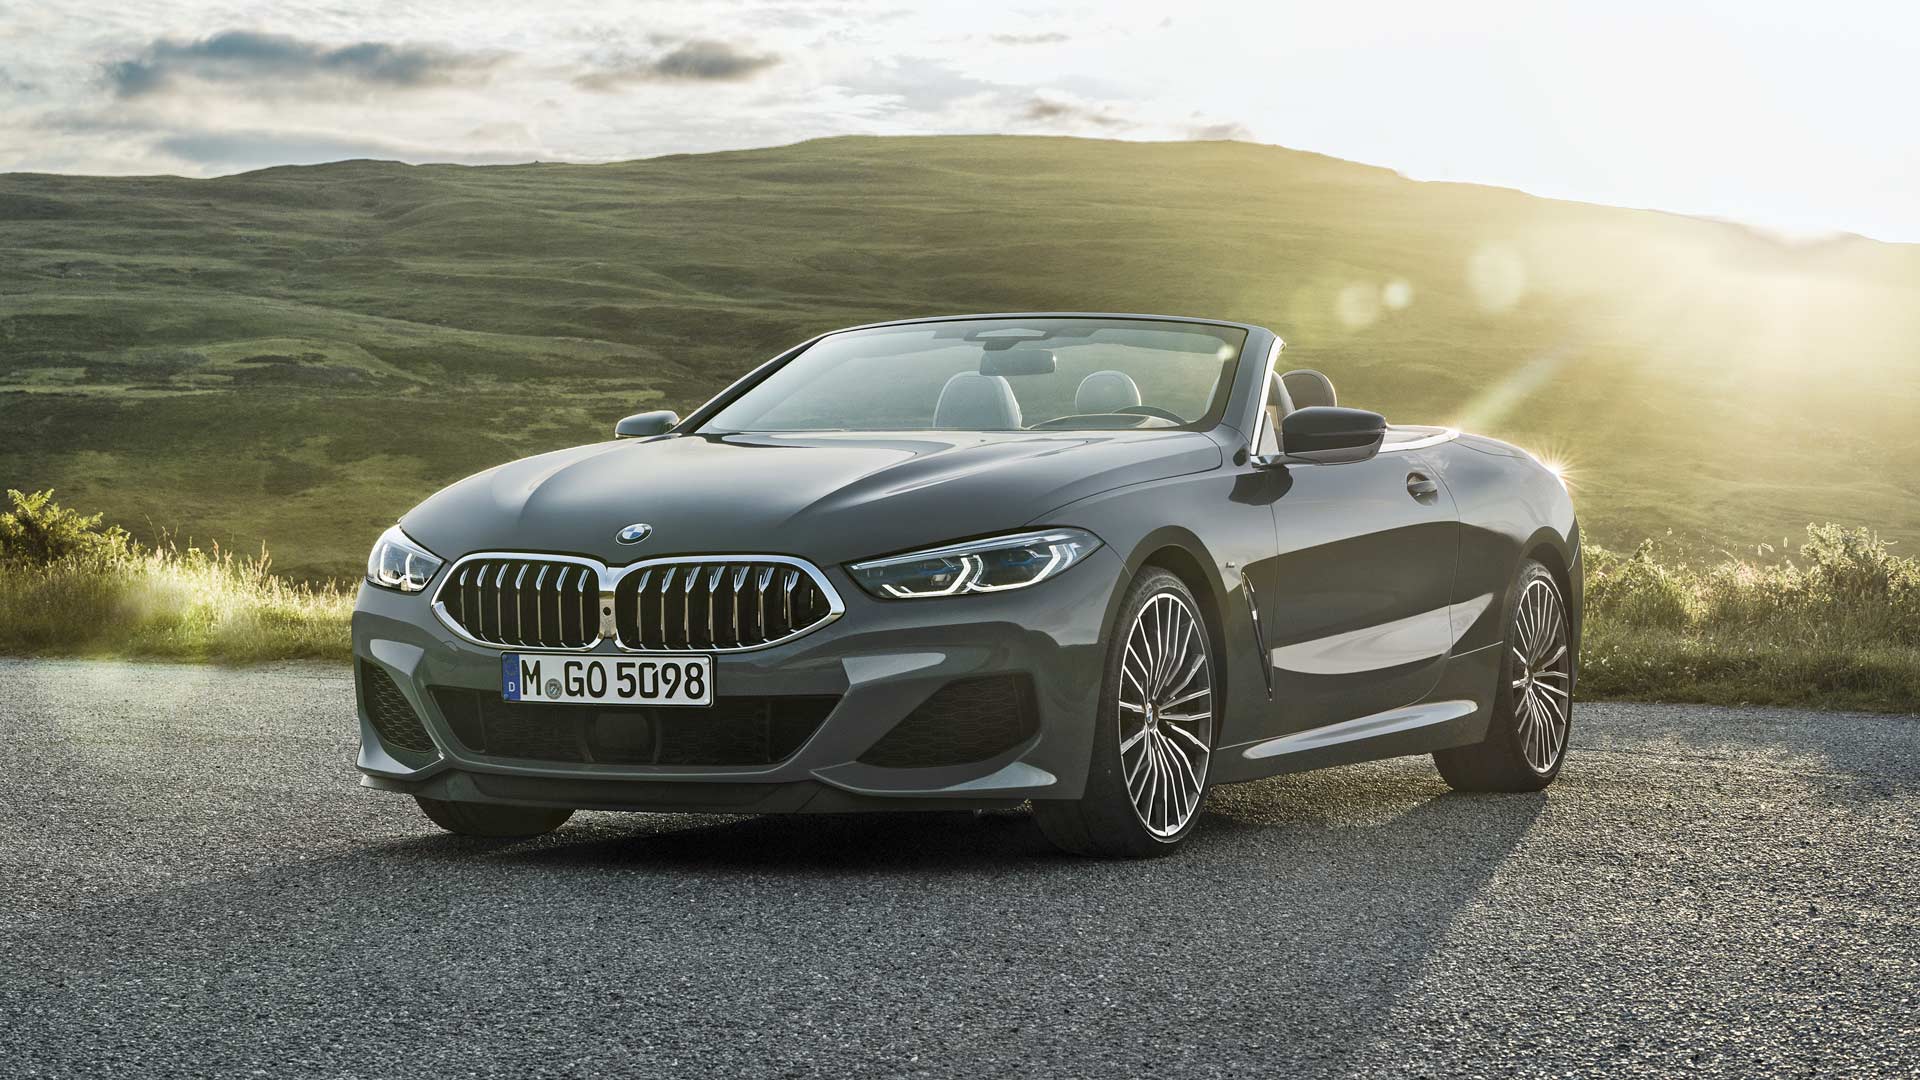 New BMW 8 Series drops top, adds neck warmers